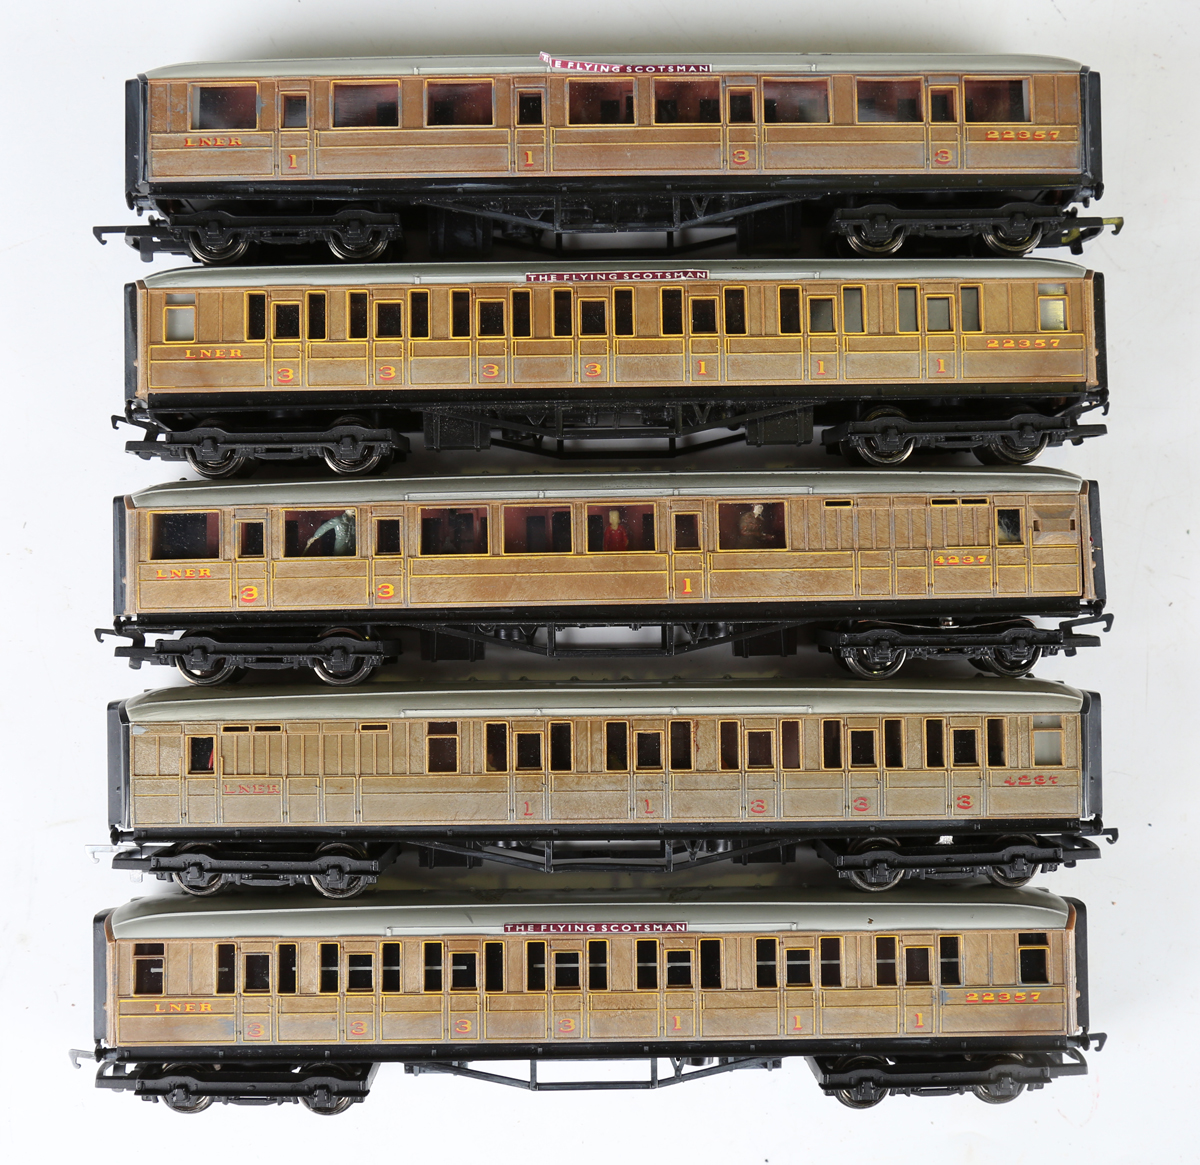 A collection of Hornby gauge OO railway items, including locomotive 'Flying Scotsman' and tender, ' - Image 6 of 8